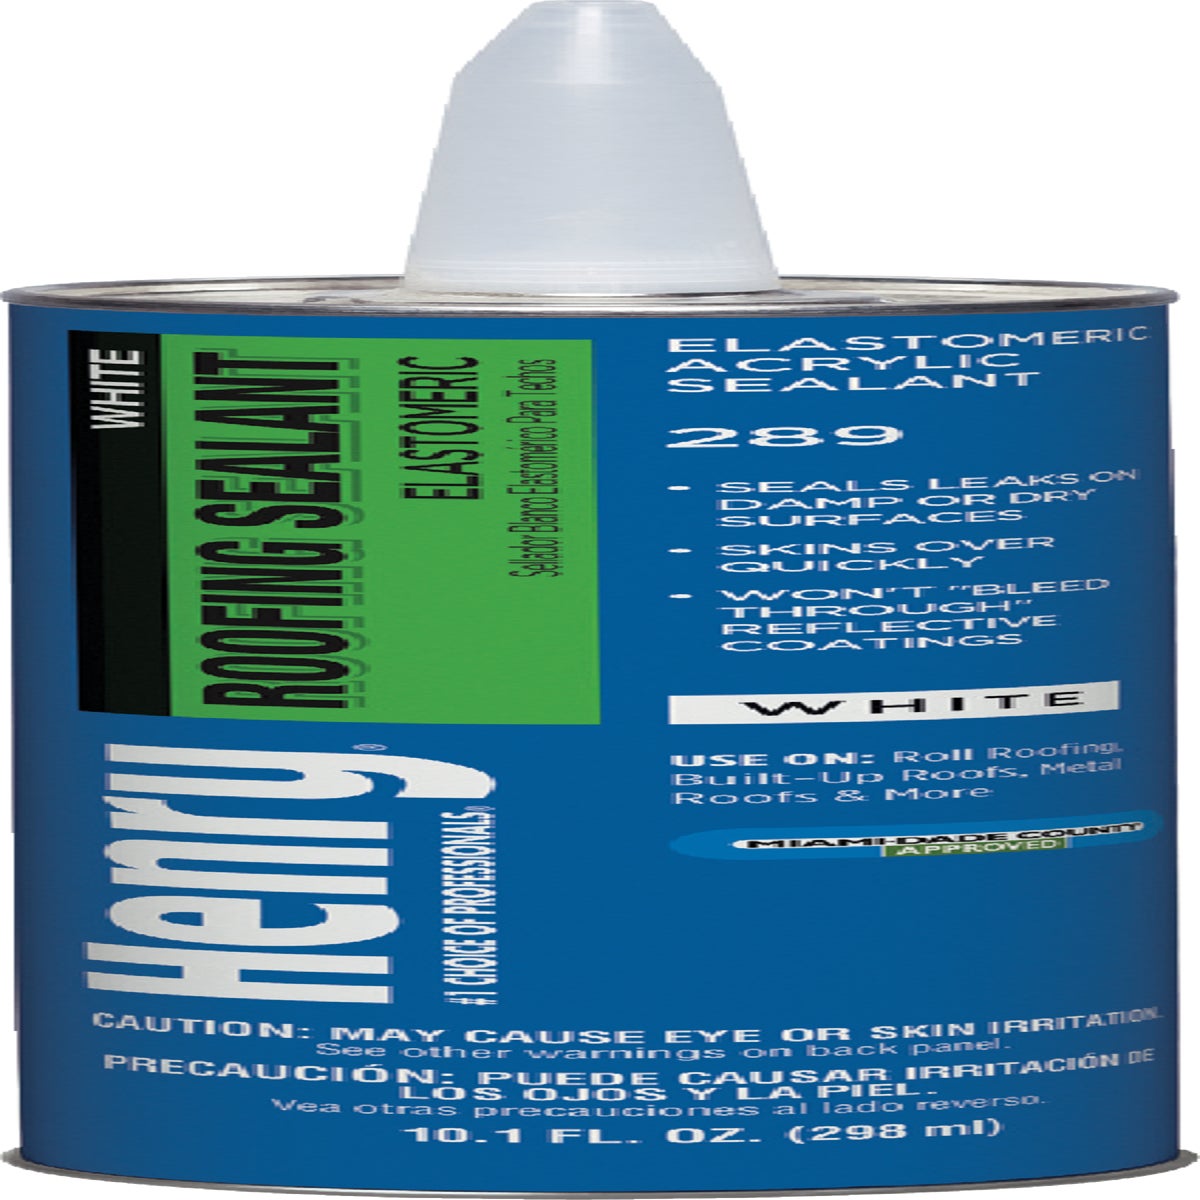 HE289004 Henry White Roof Cement and Patching Sealant & cement patching roof sealant